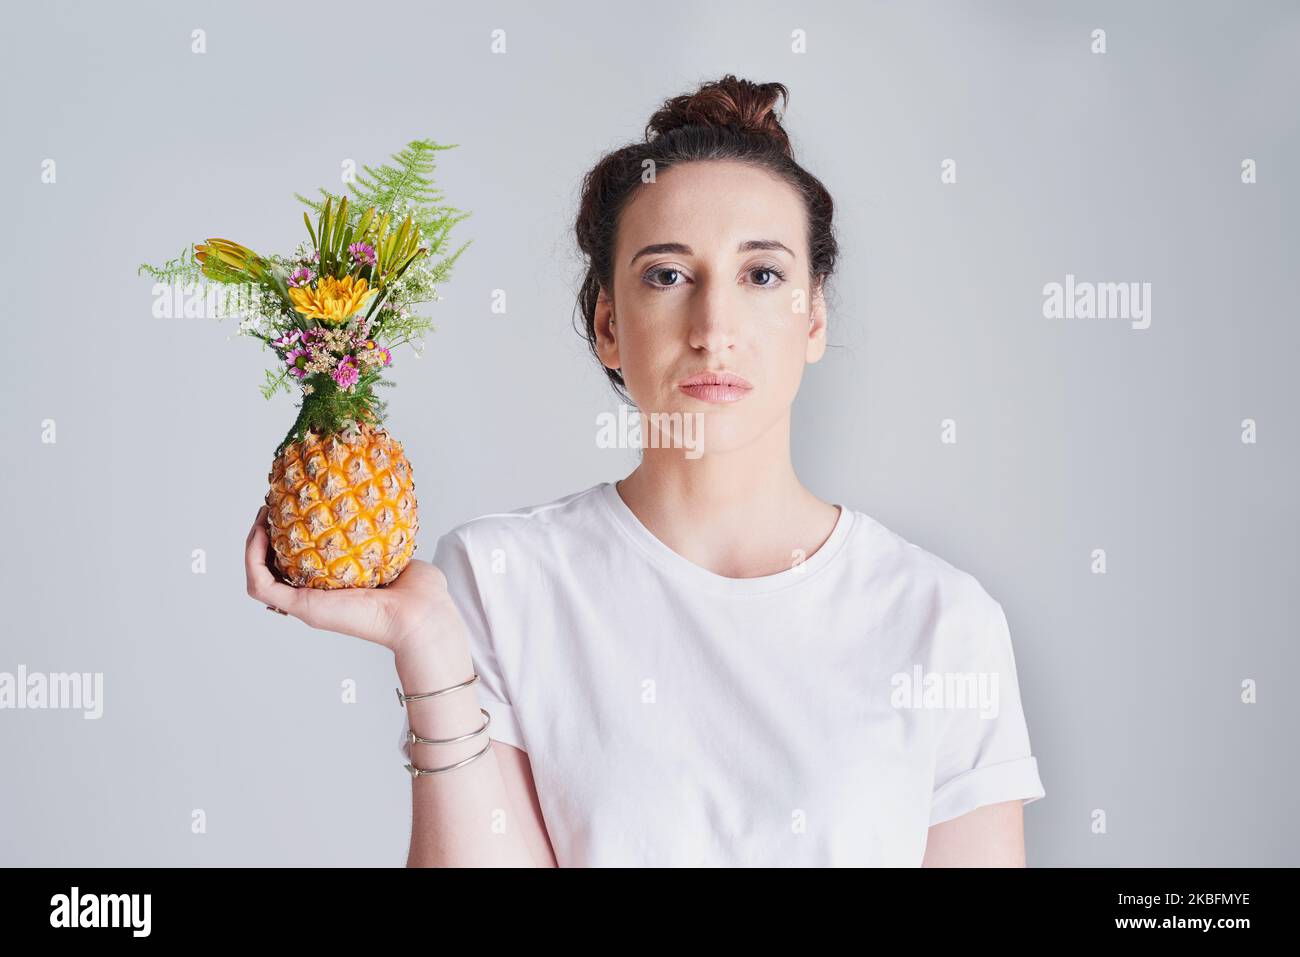 I like to decorate my fruit with flowers before I eat it. Studio shot of a beautiful young woman holding a pineapple against a grey background. Stock Photo